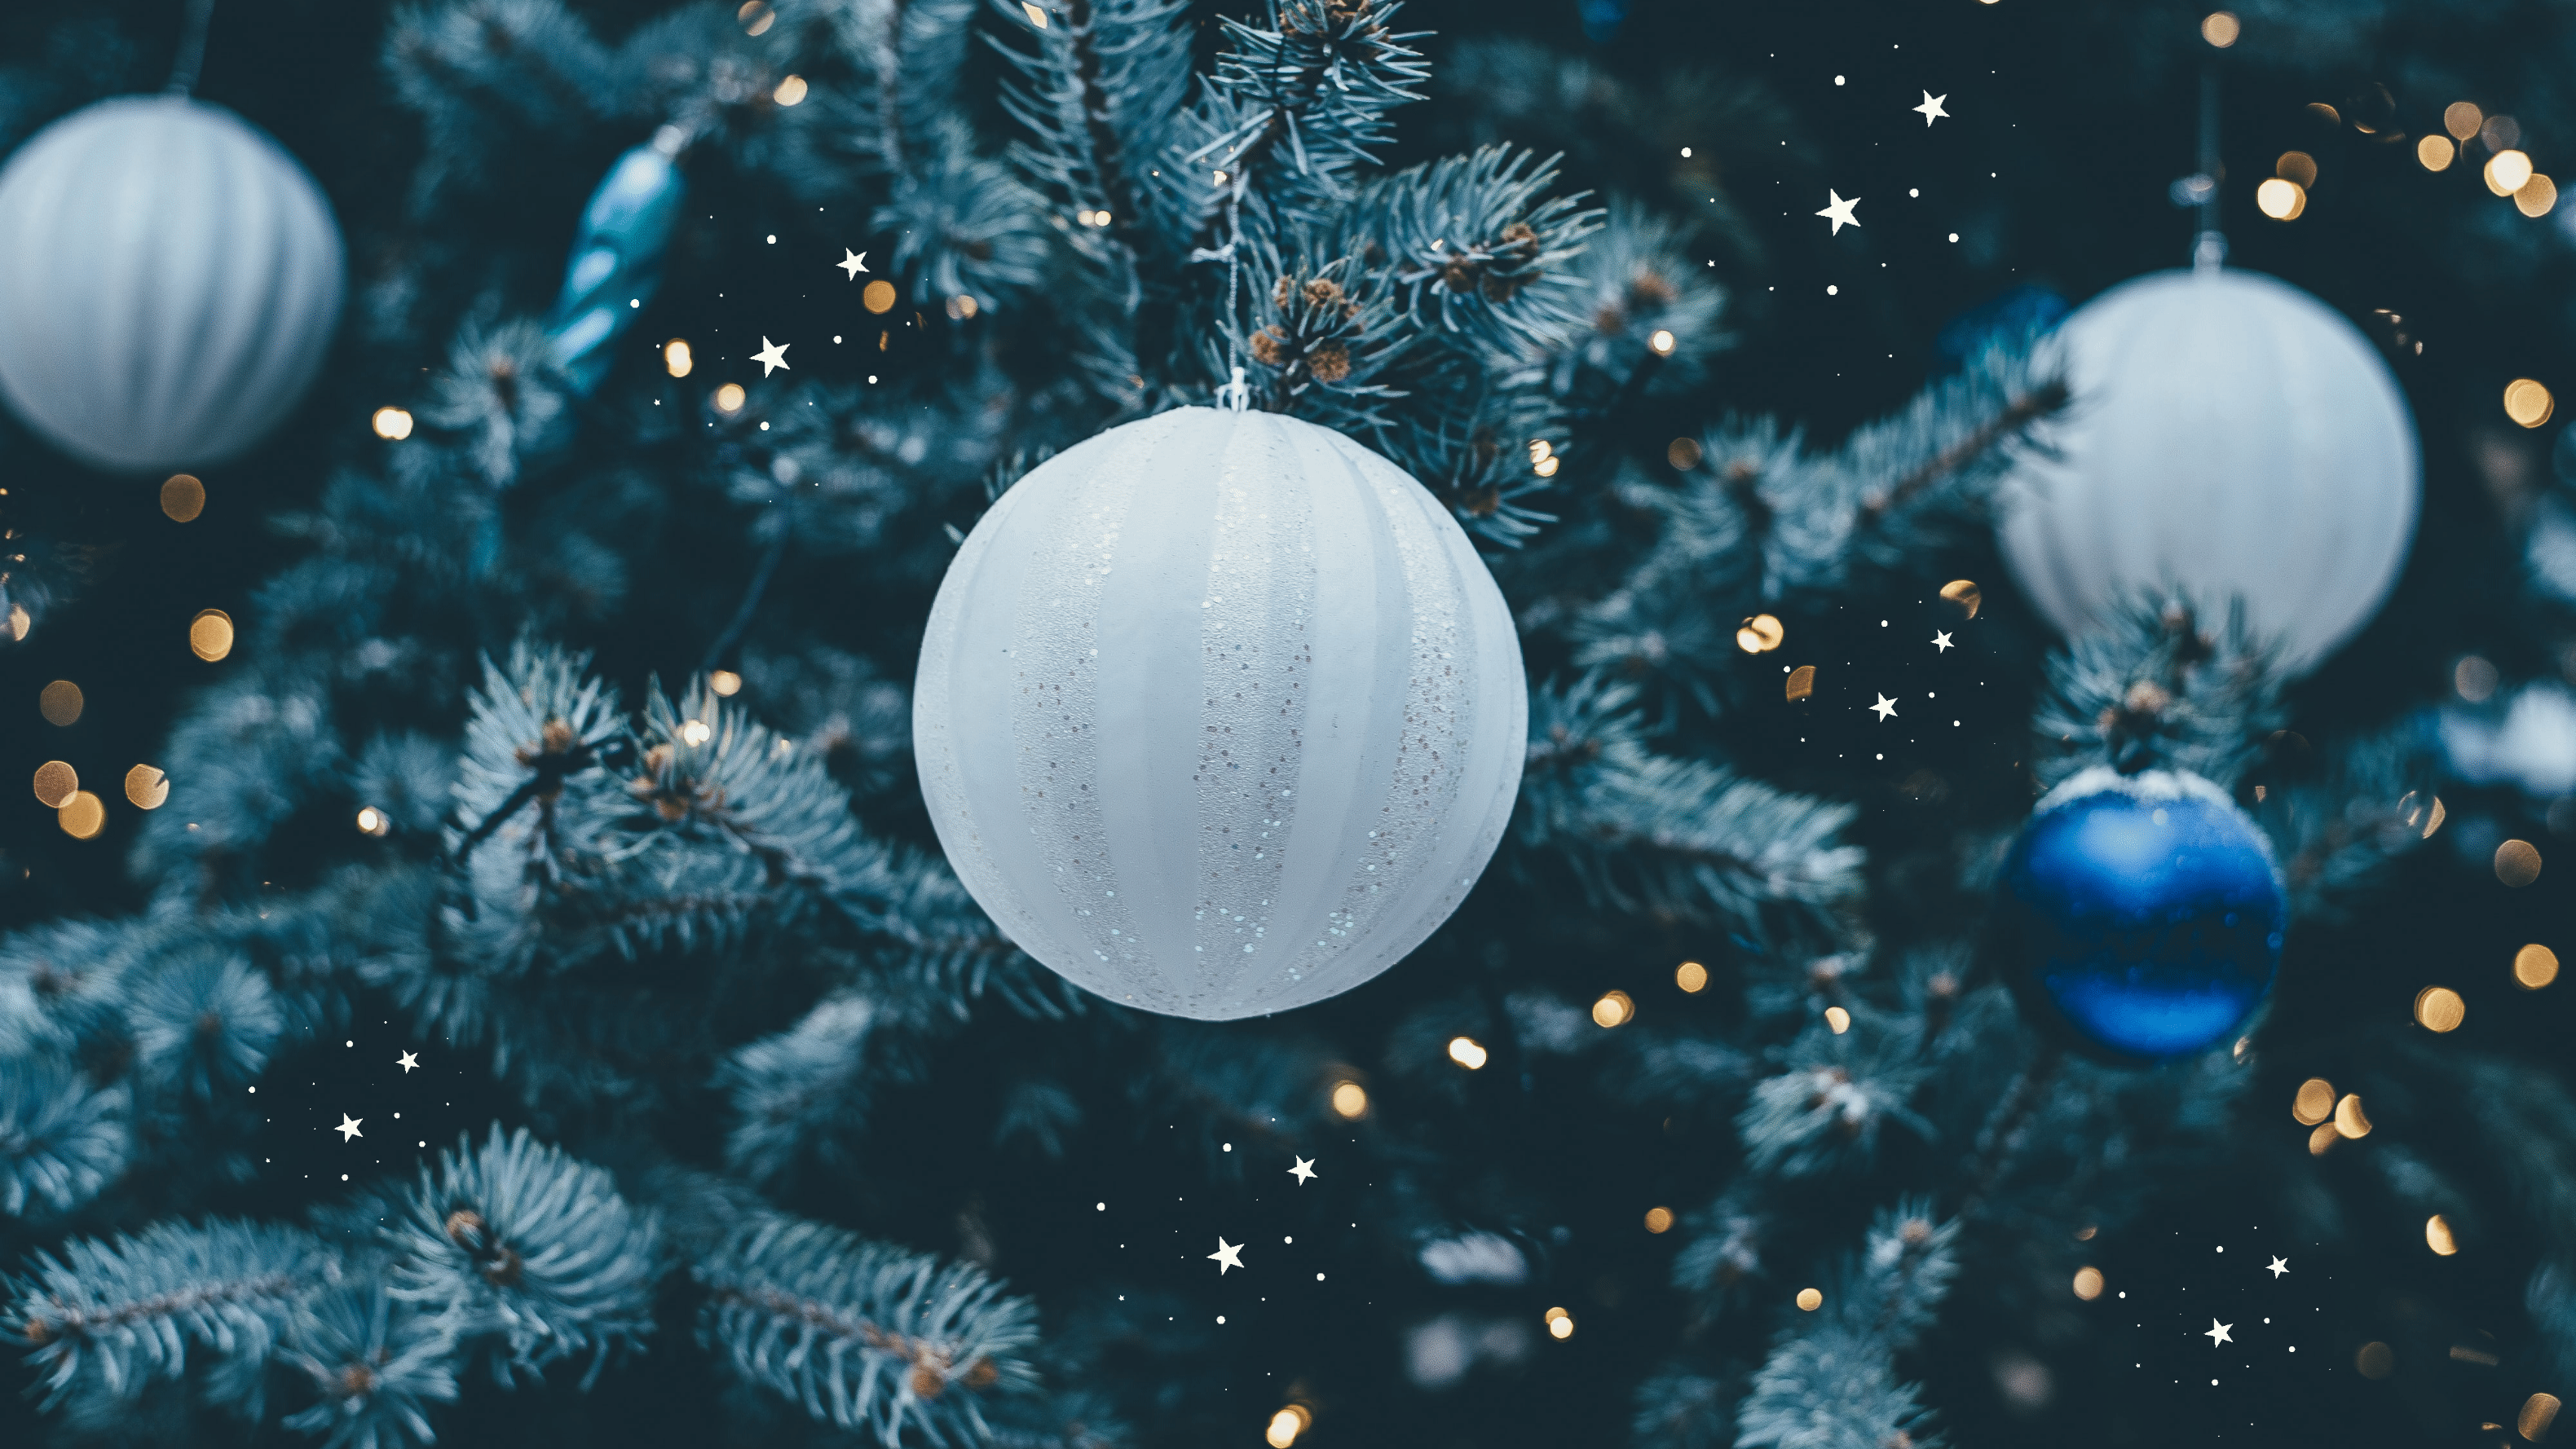 Christmas Backgrounds for Your Phone Computer or Zoom Meeting